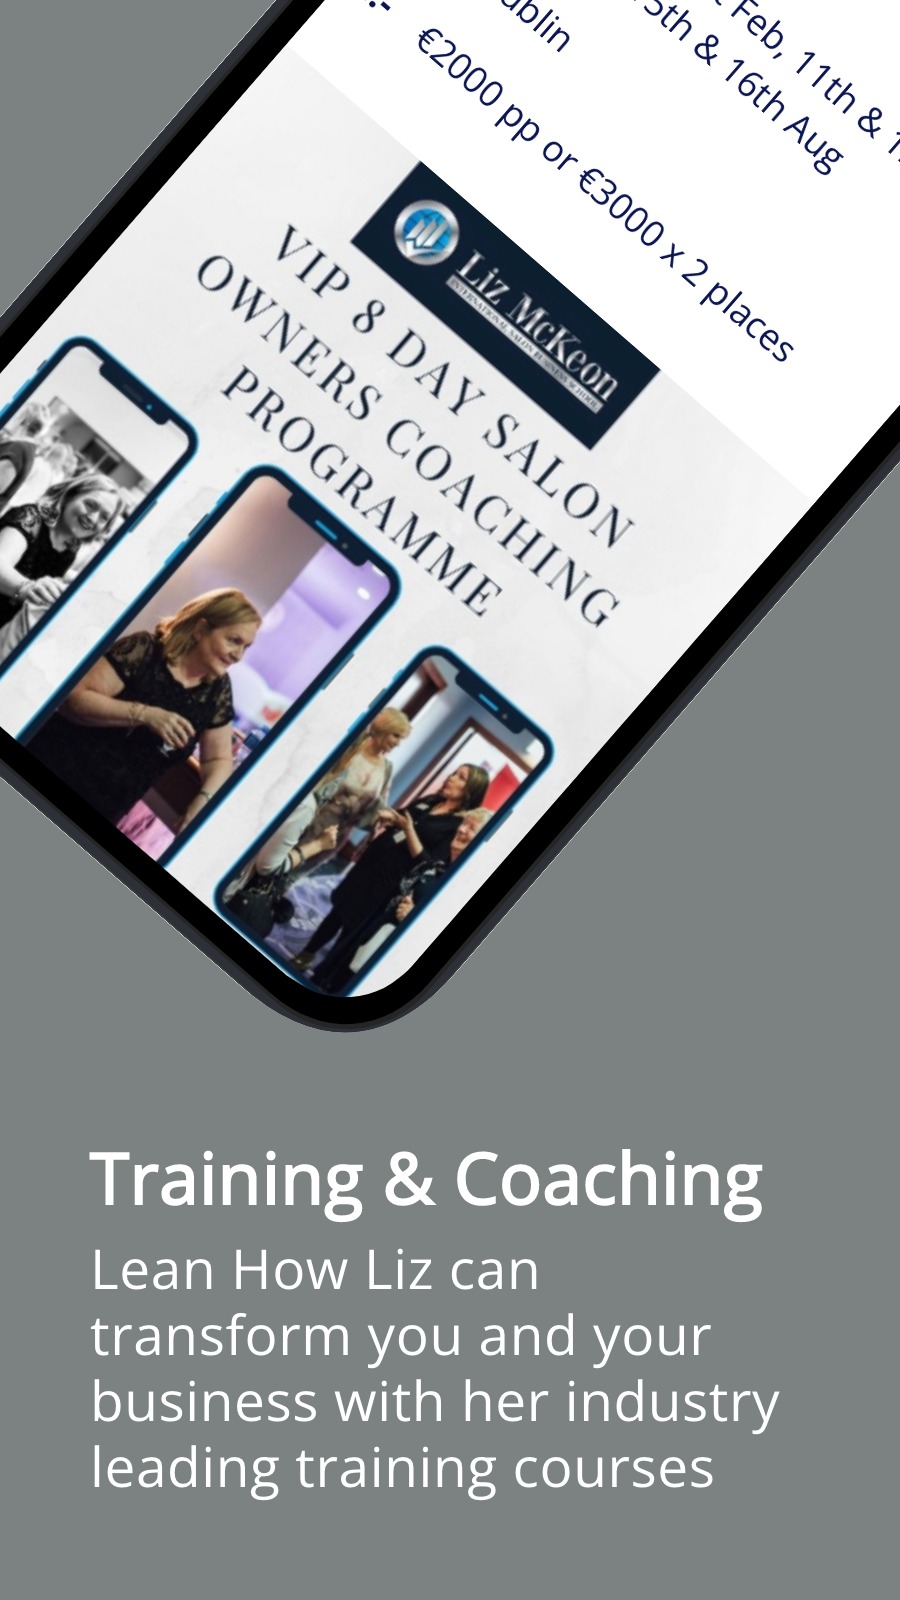 Training & Coaching - Lean How Liz can transform you and your business with her industry leading training courses